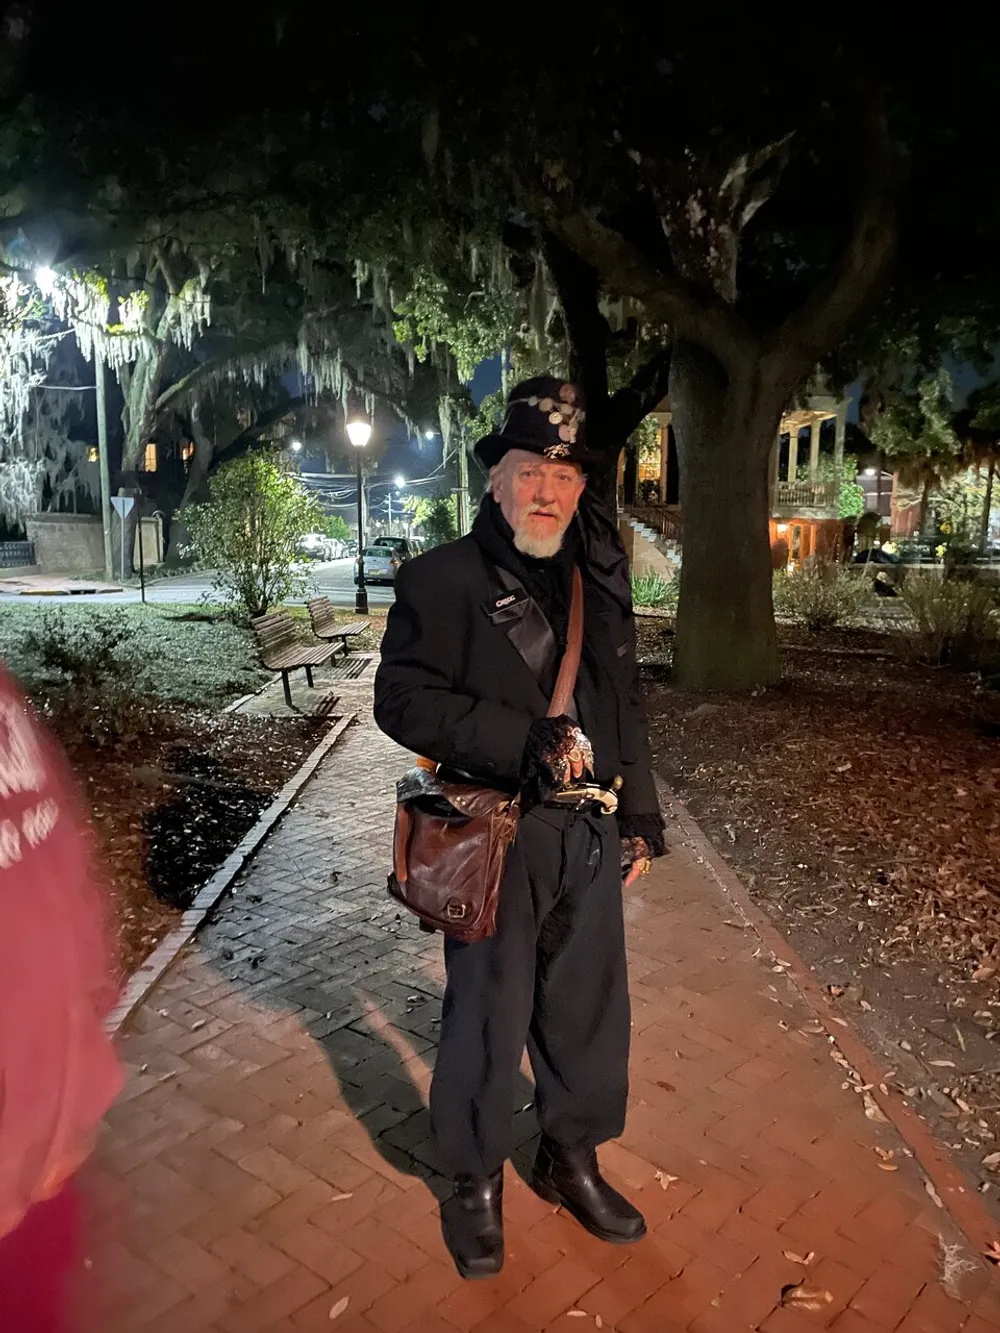 A person dressed in Victorian-era attire is standing on a brick path at night with Spanish moss-draped trees in the background